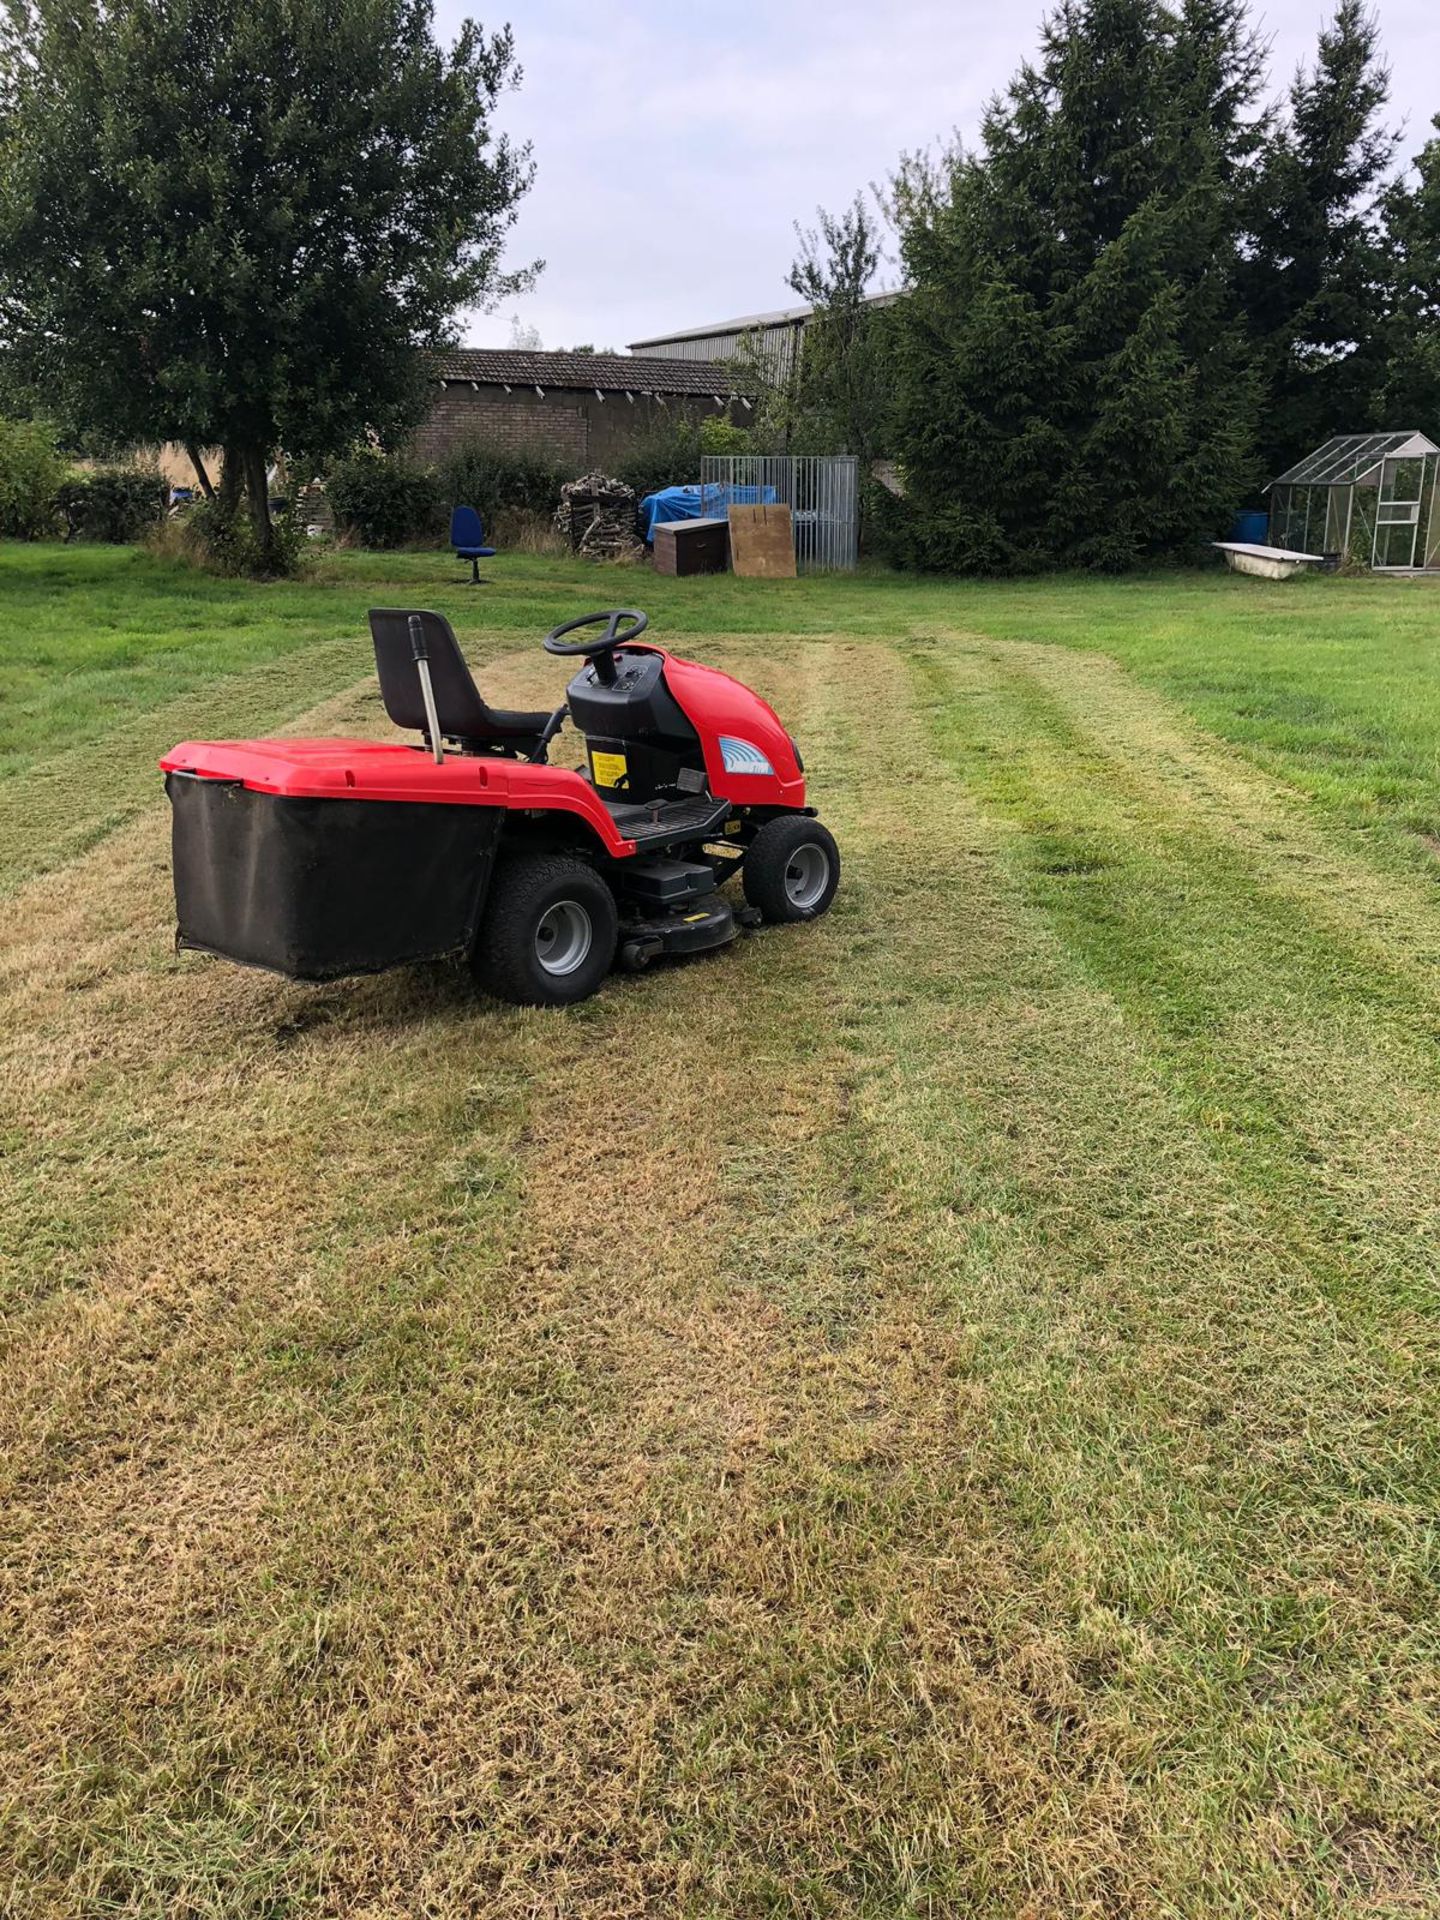 LAWNSTAR RIDE ON PETROL LAWN MOWER WITH REAR GRASS COLLECTOR, STARTS, RUNS AND CUTS *NO VAT* - Image 4 of 7